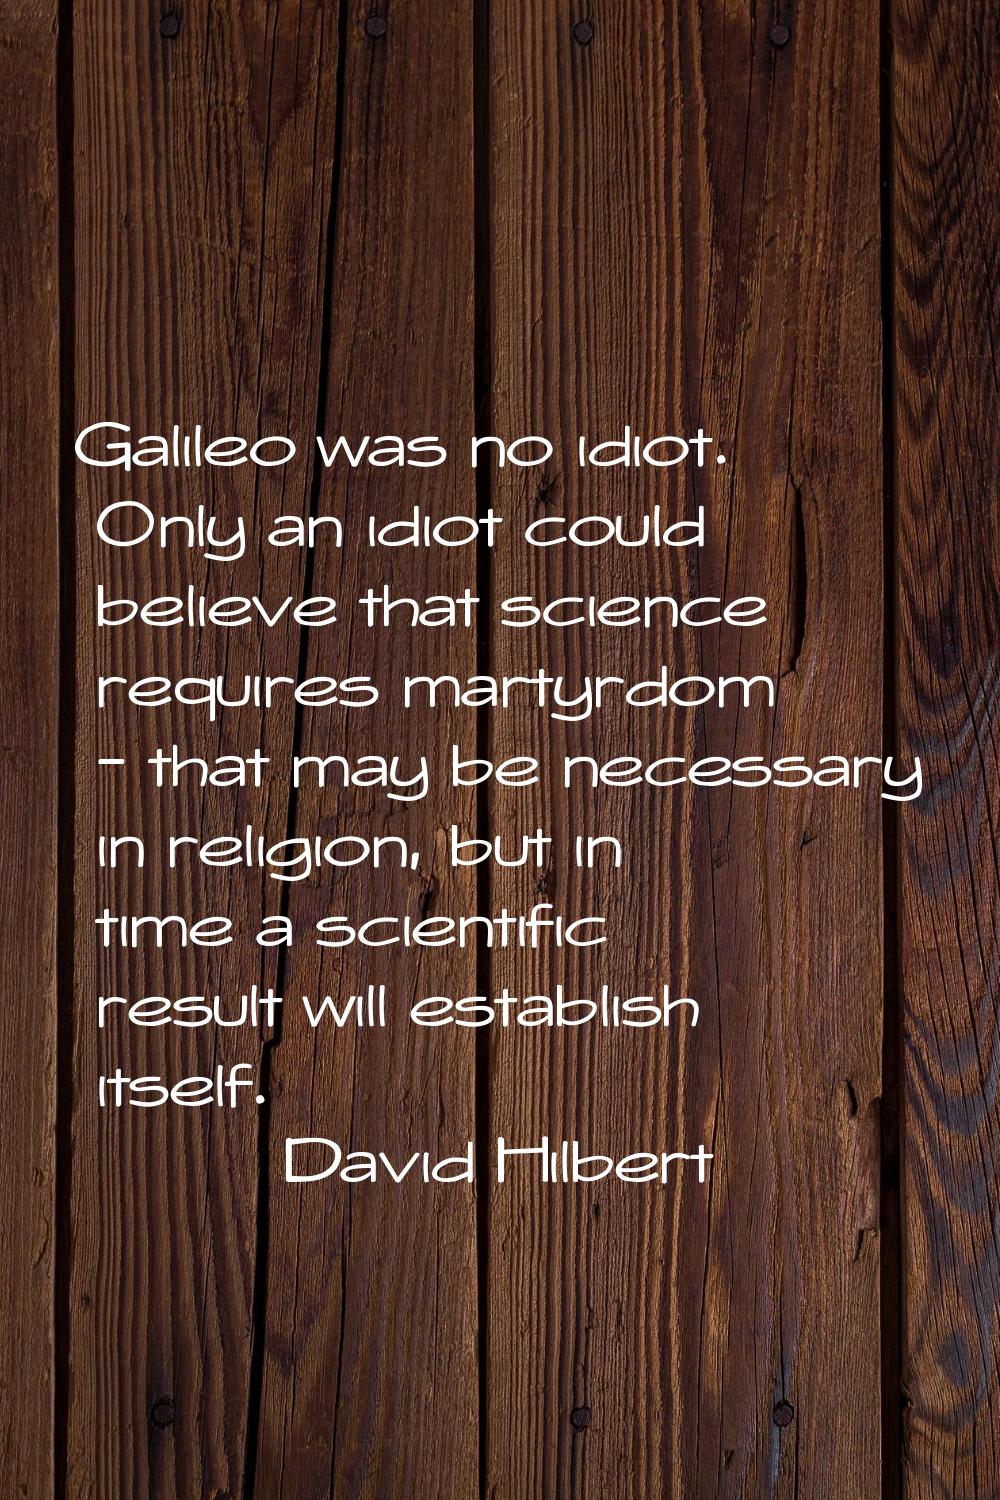 Galileo was no idiot. Only an idiot could believe that science requires martyrdom - that may be nec